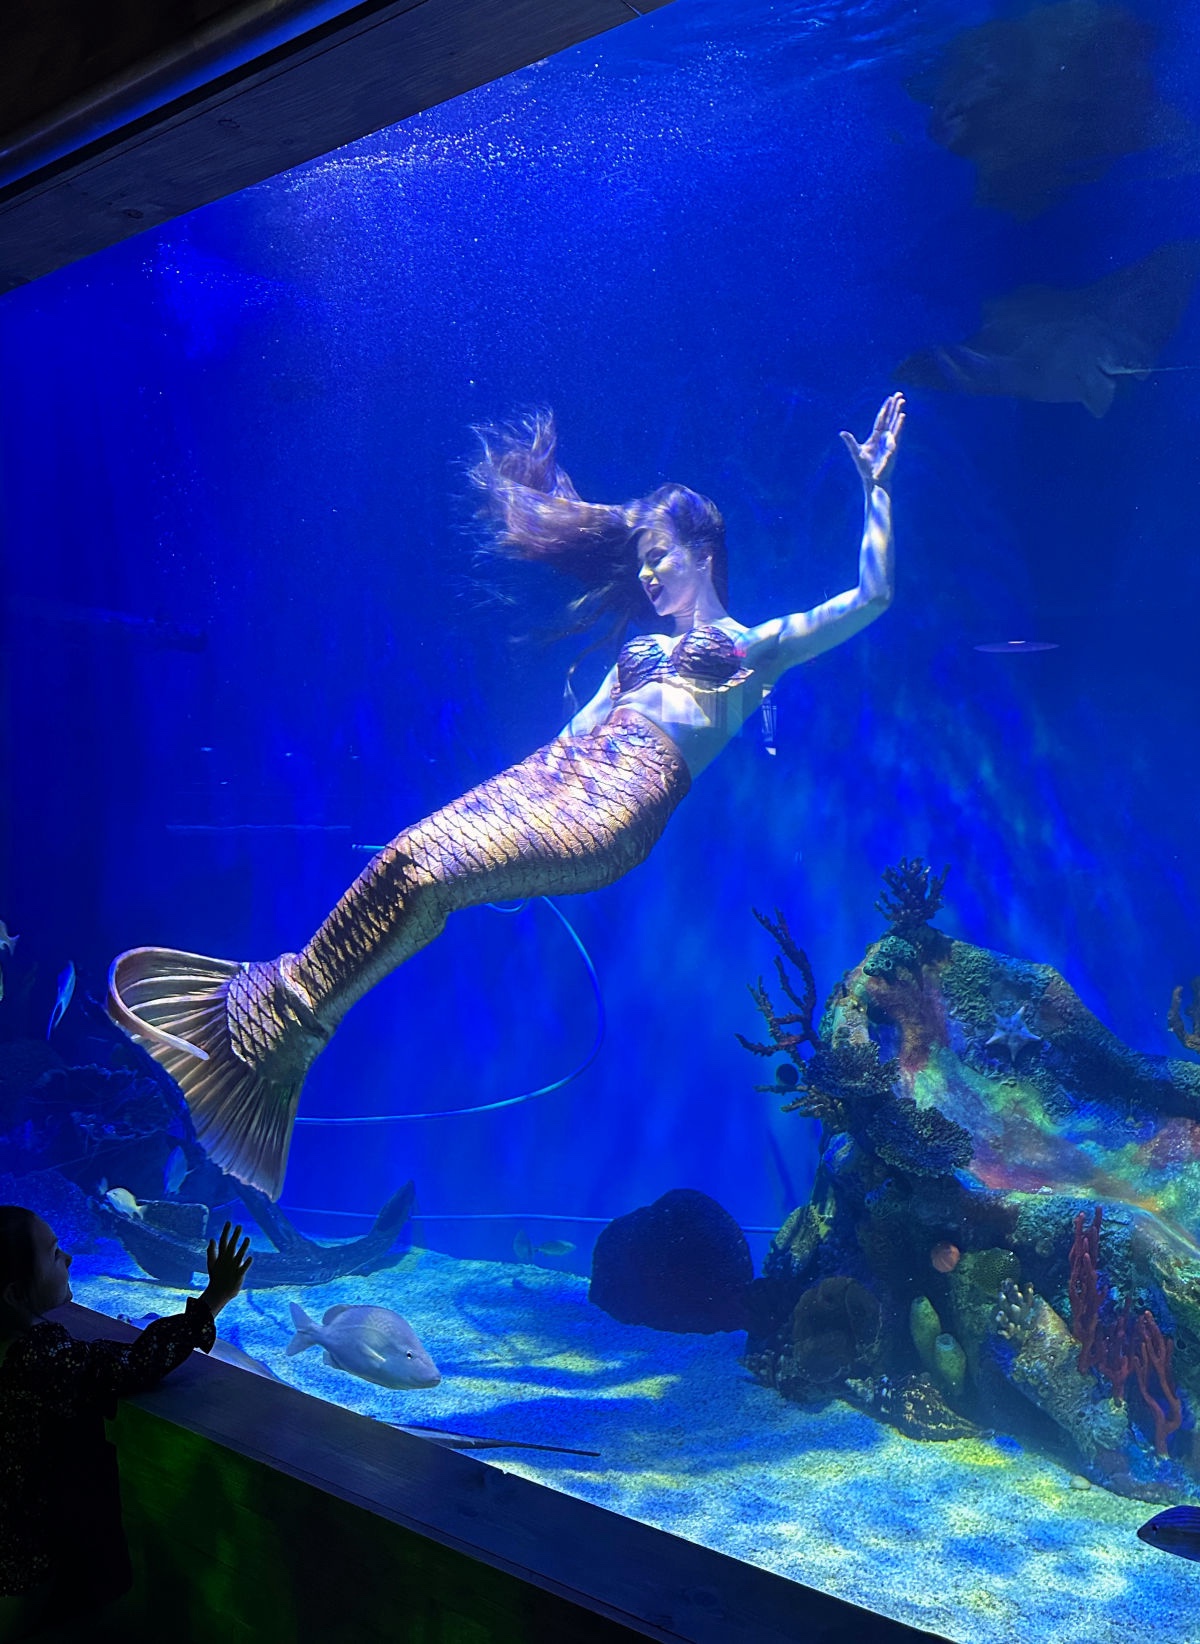 You'll also learn about the history and mythology of mermaids, as well as the conservation efforts to protect marine life.